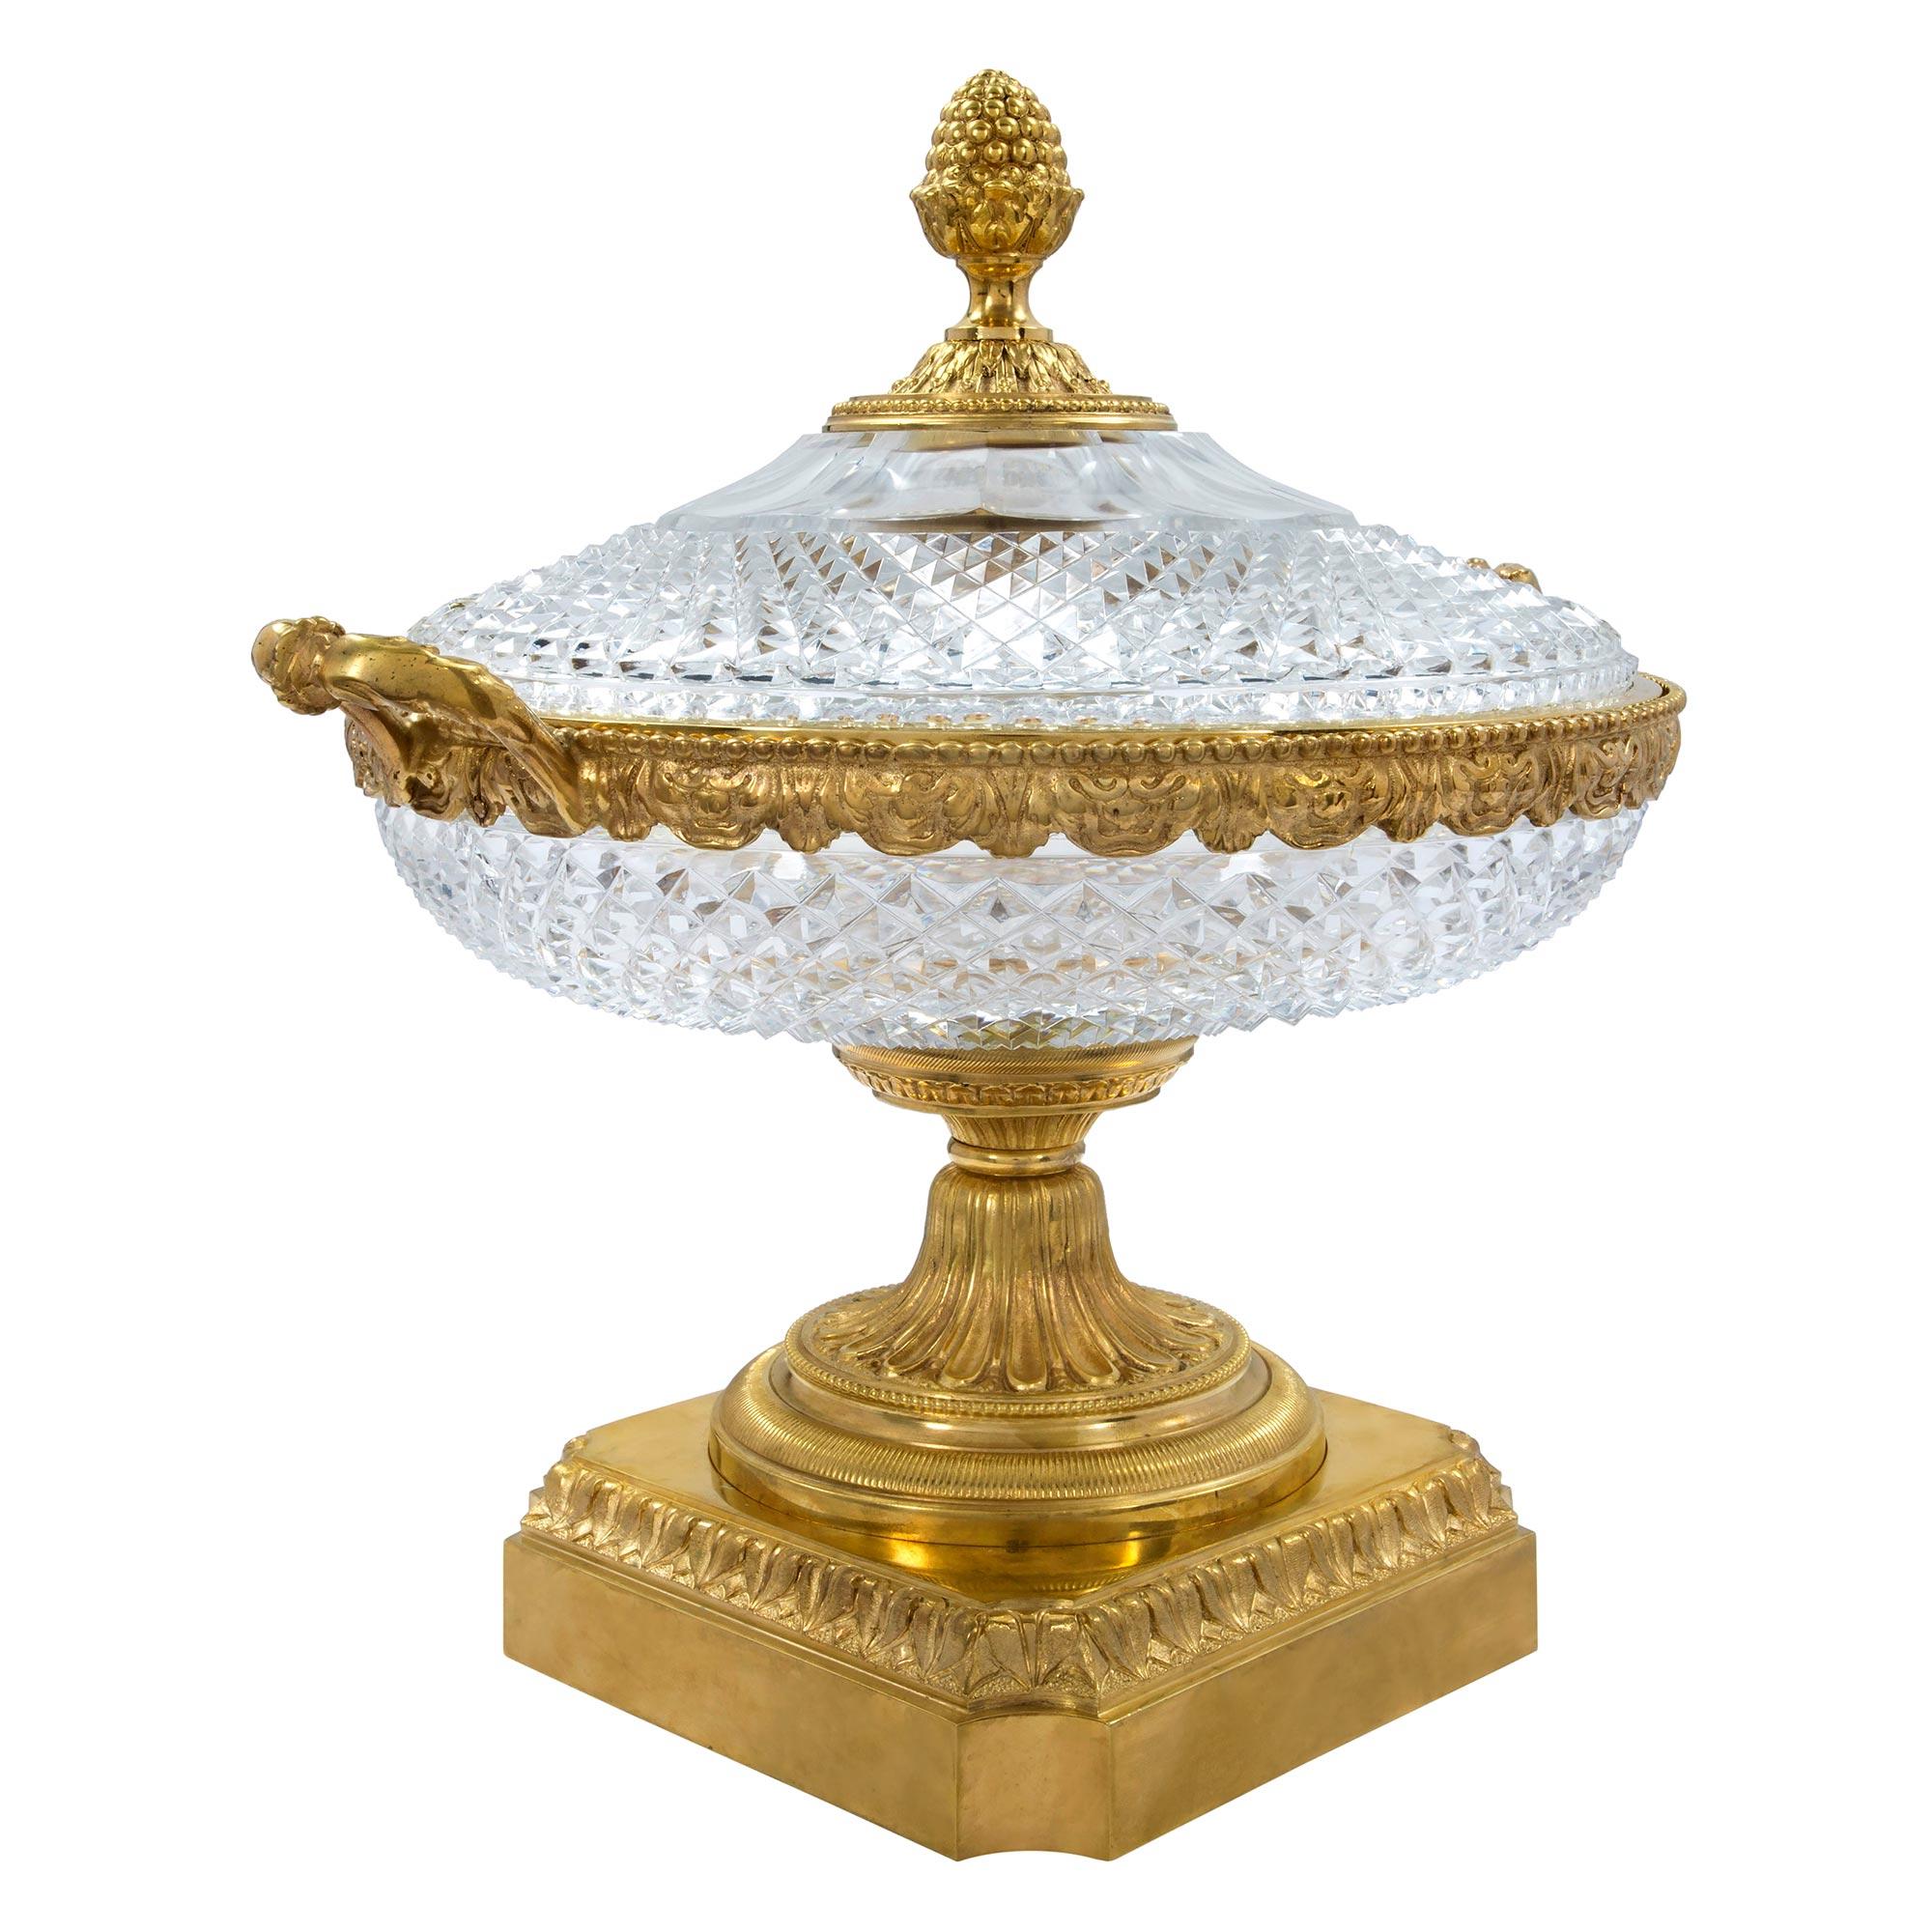 French Mid-19th Century Louis XVI Style Baccarat Crystal and Ormolu Centerpiece In Good Condition For Sale In West Palm Beach, FL